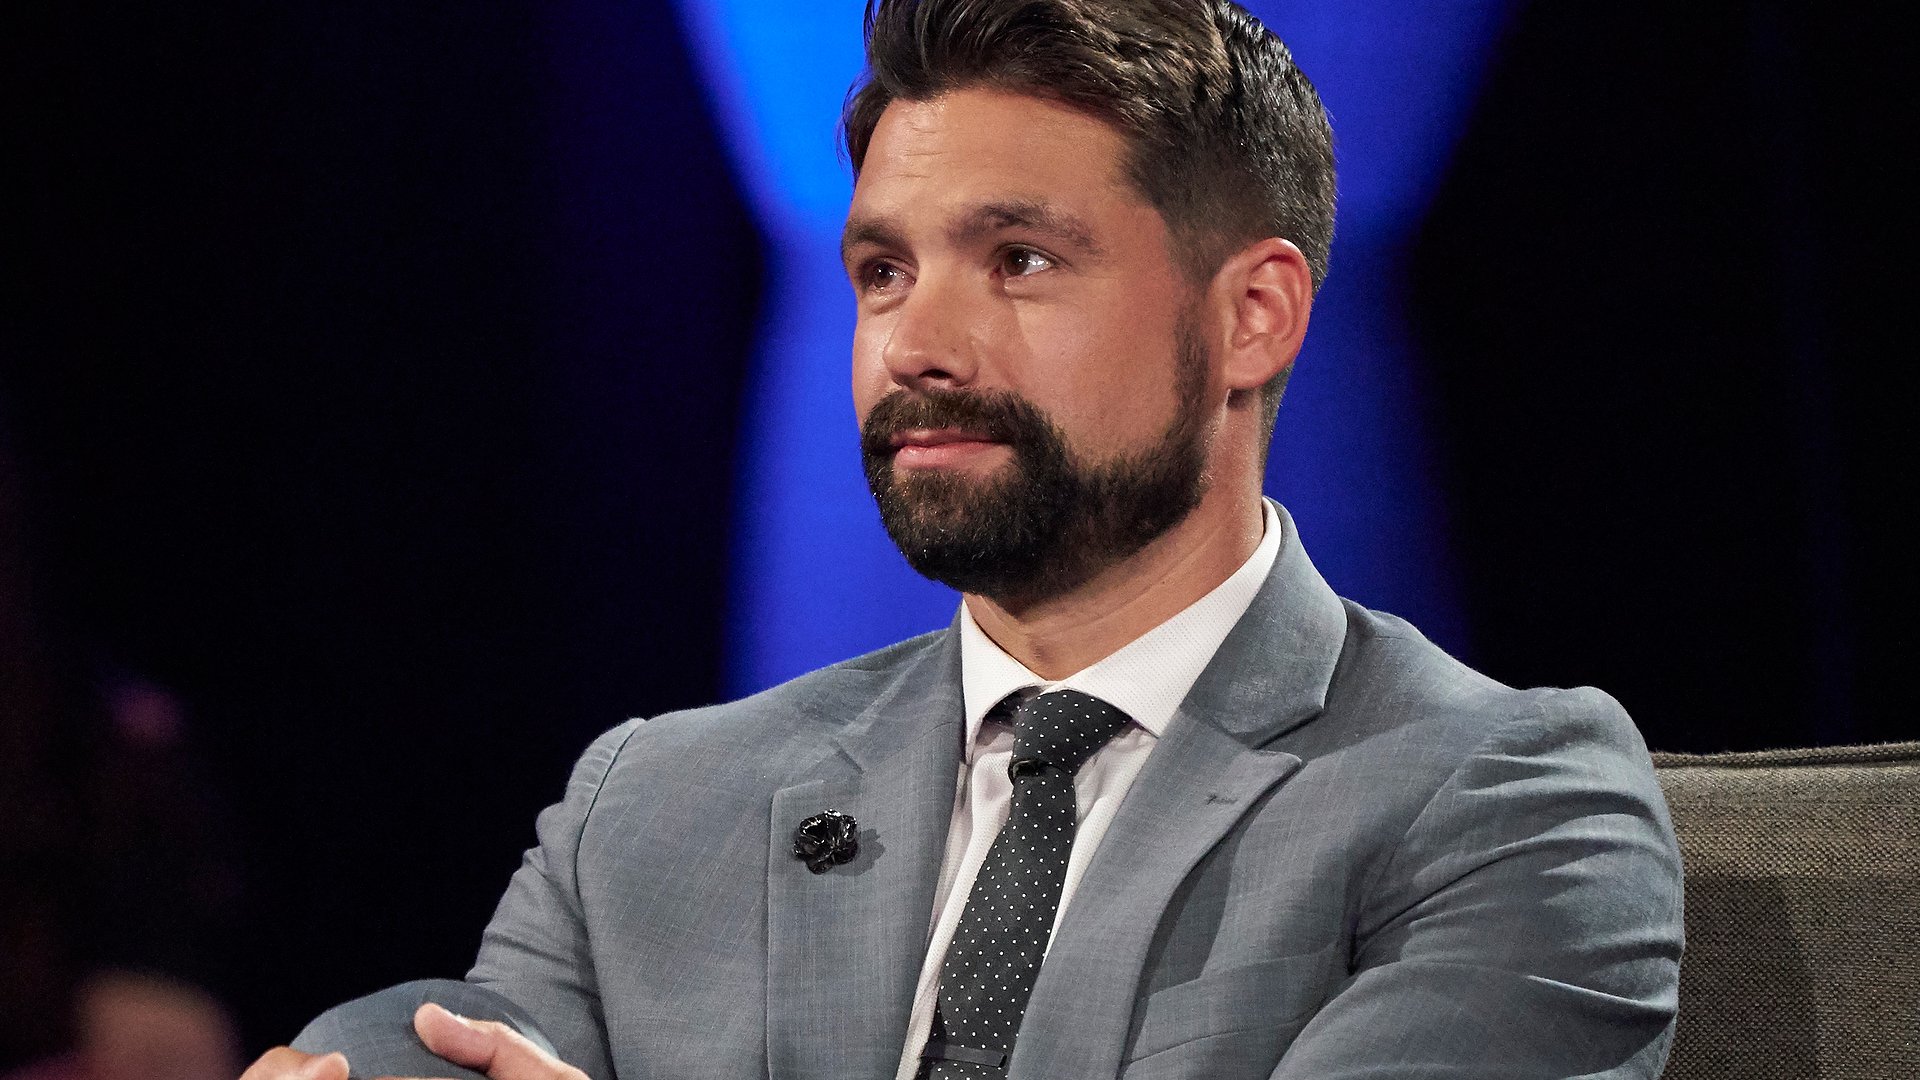 Michael Allio sits on the hot seat during ‘The Bachelorette’ Season 17 ‘Men Tell All’ special episode